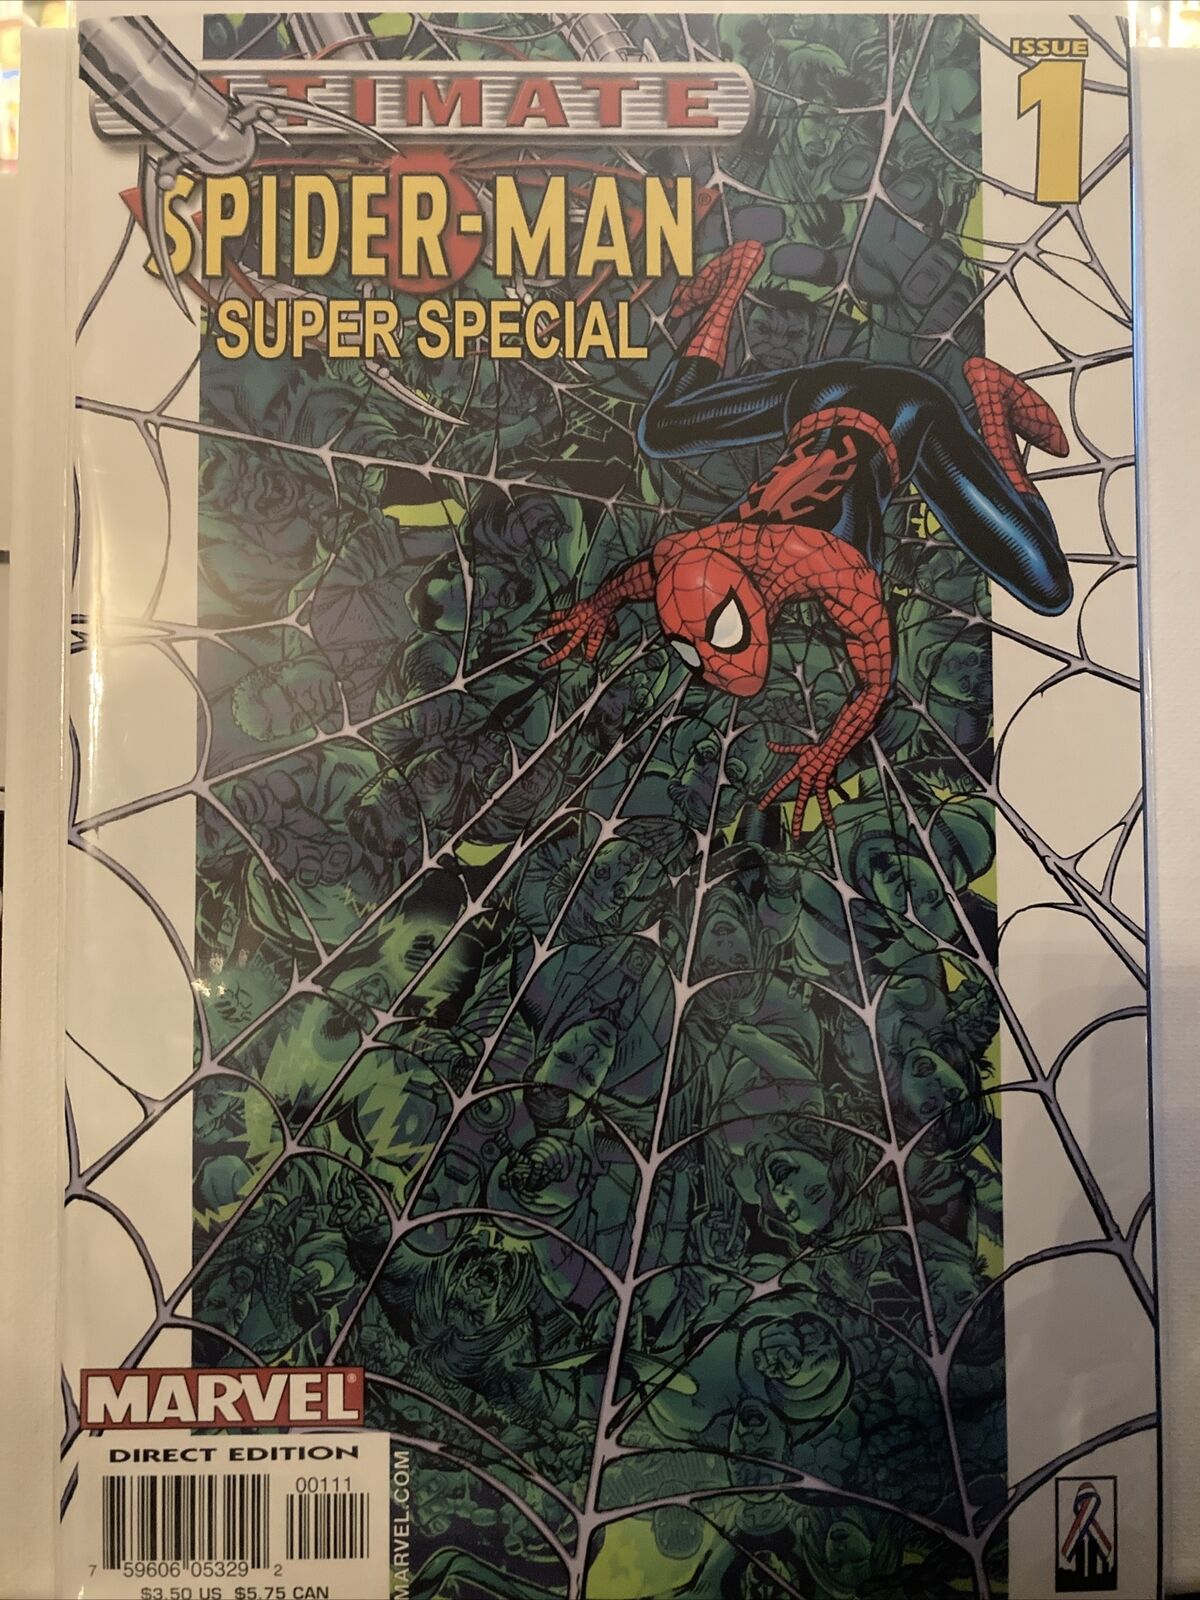 ULTIMATE SPIDER-MAN SUPER SPECIAL #1 2002 BENDIS WITH ALL STAR LINEUP OF ARTISTS